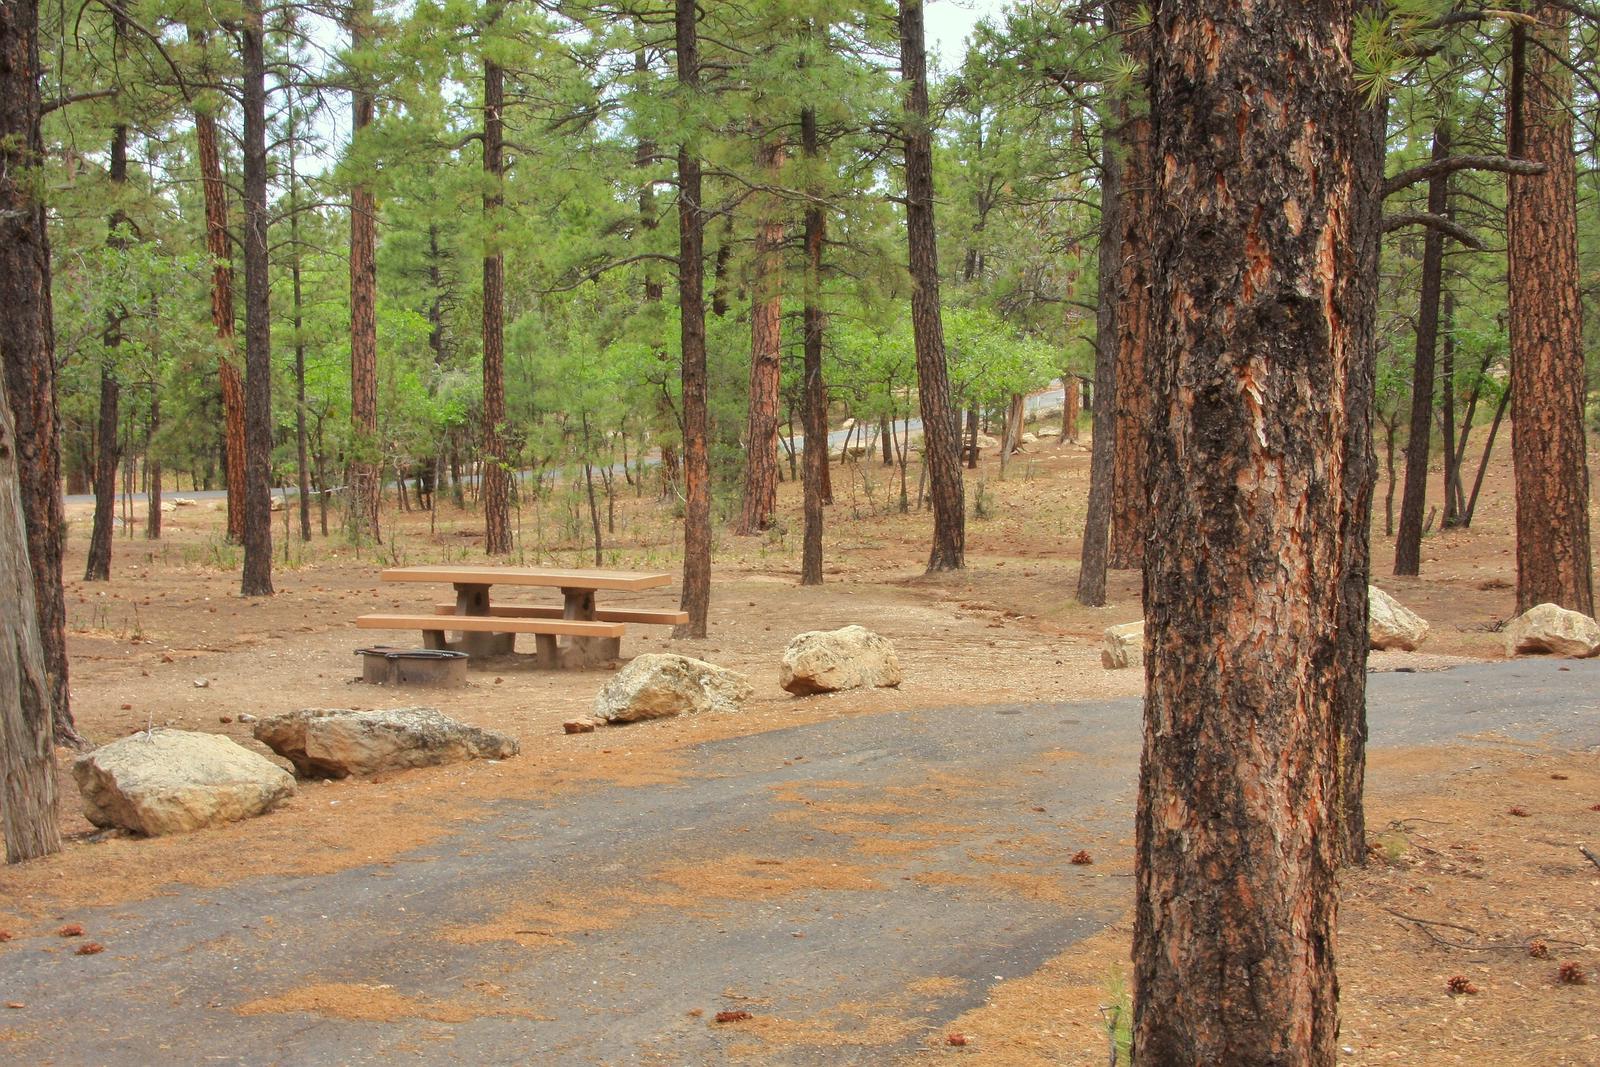 Picnic table, fire pit, and parking spot, Mather CampgroundPicnic table, fire pit, and parking spot for Fir Loop 63, Mather Campground